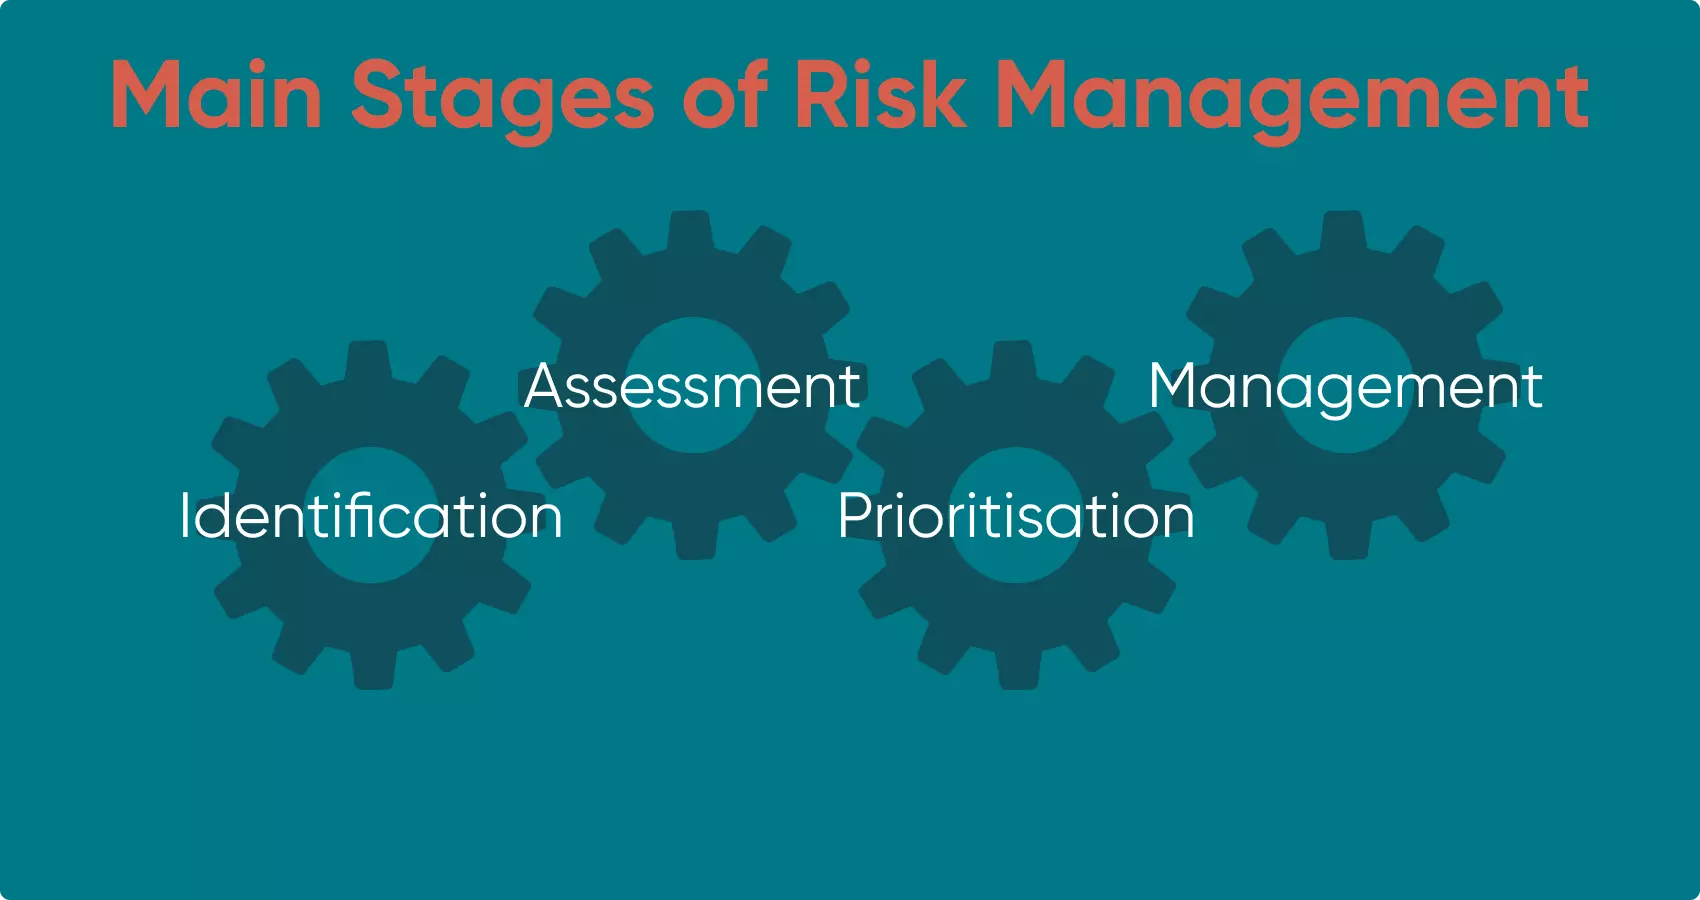 There are many minor aspects of Risk Management. Discover the more important stages and how to navigate the process.